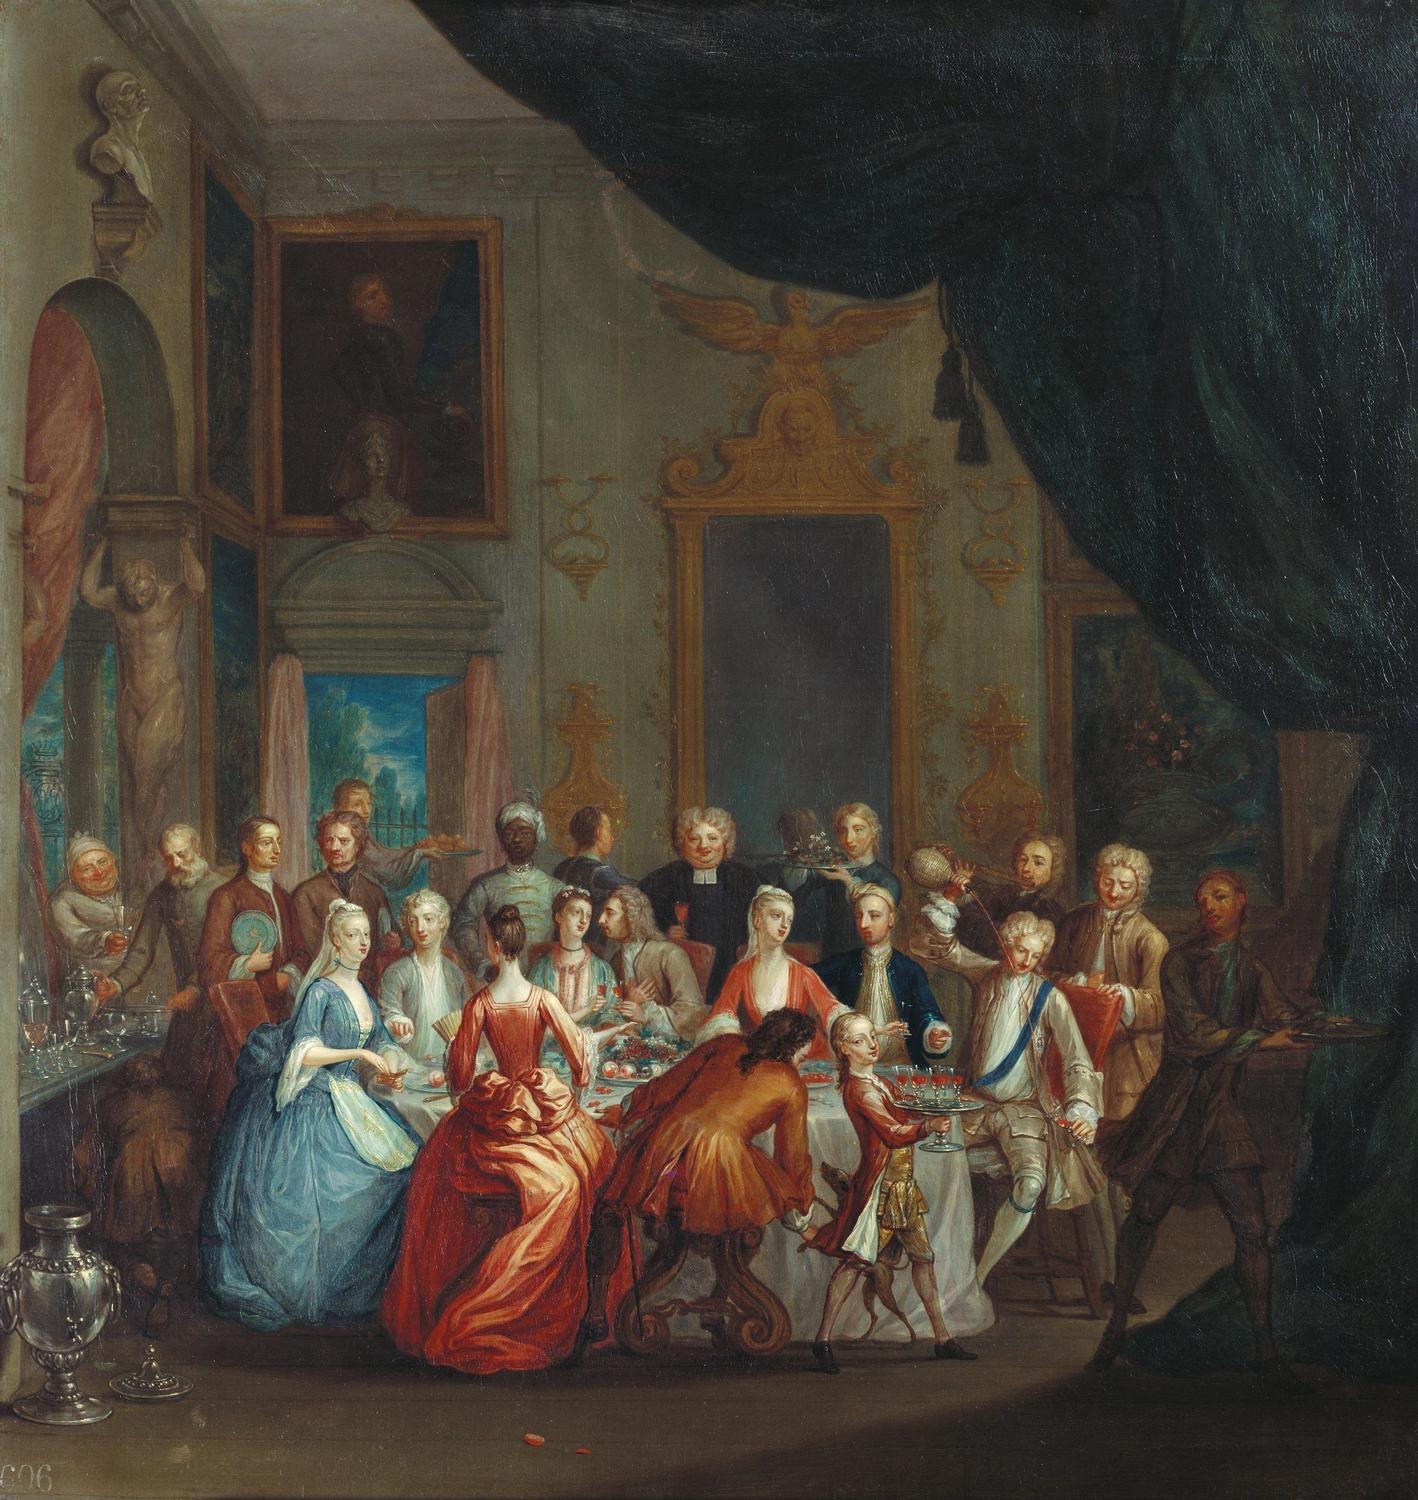 File:Marcellus Laroon the Younger (1679-1772) - A Dinner Party - RCIN  403539 - Royal Collection.jpg - Wikipedia